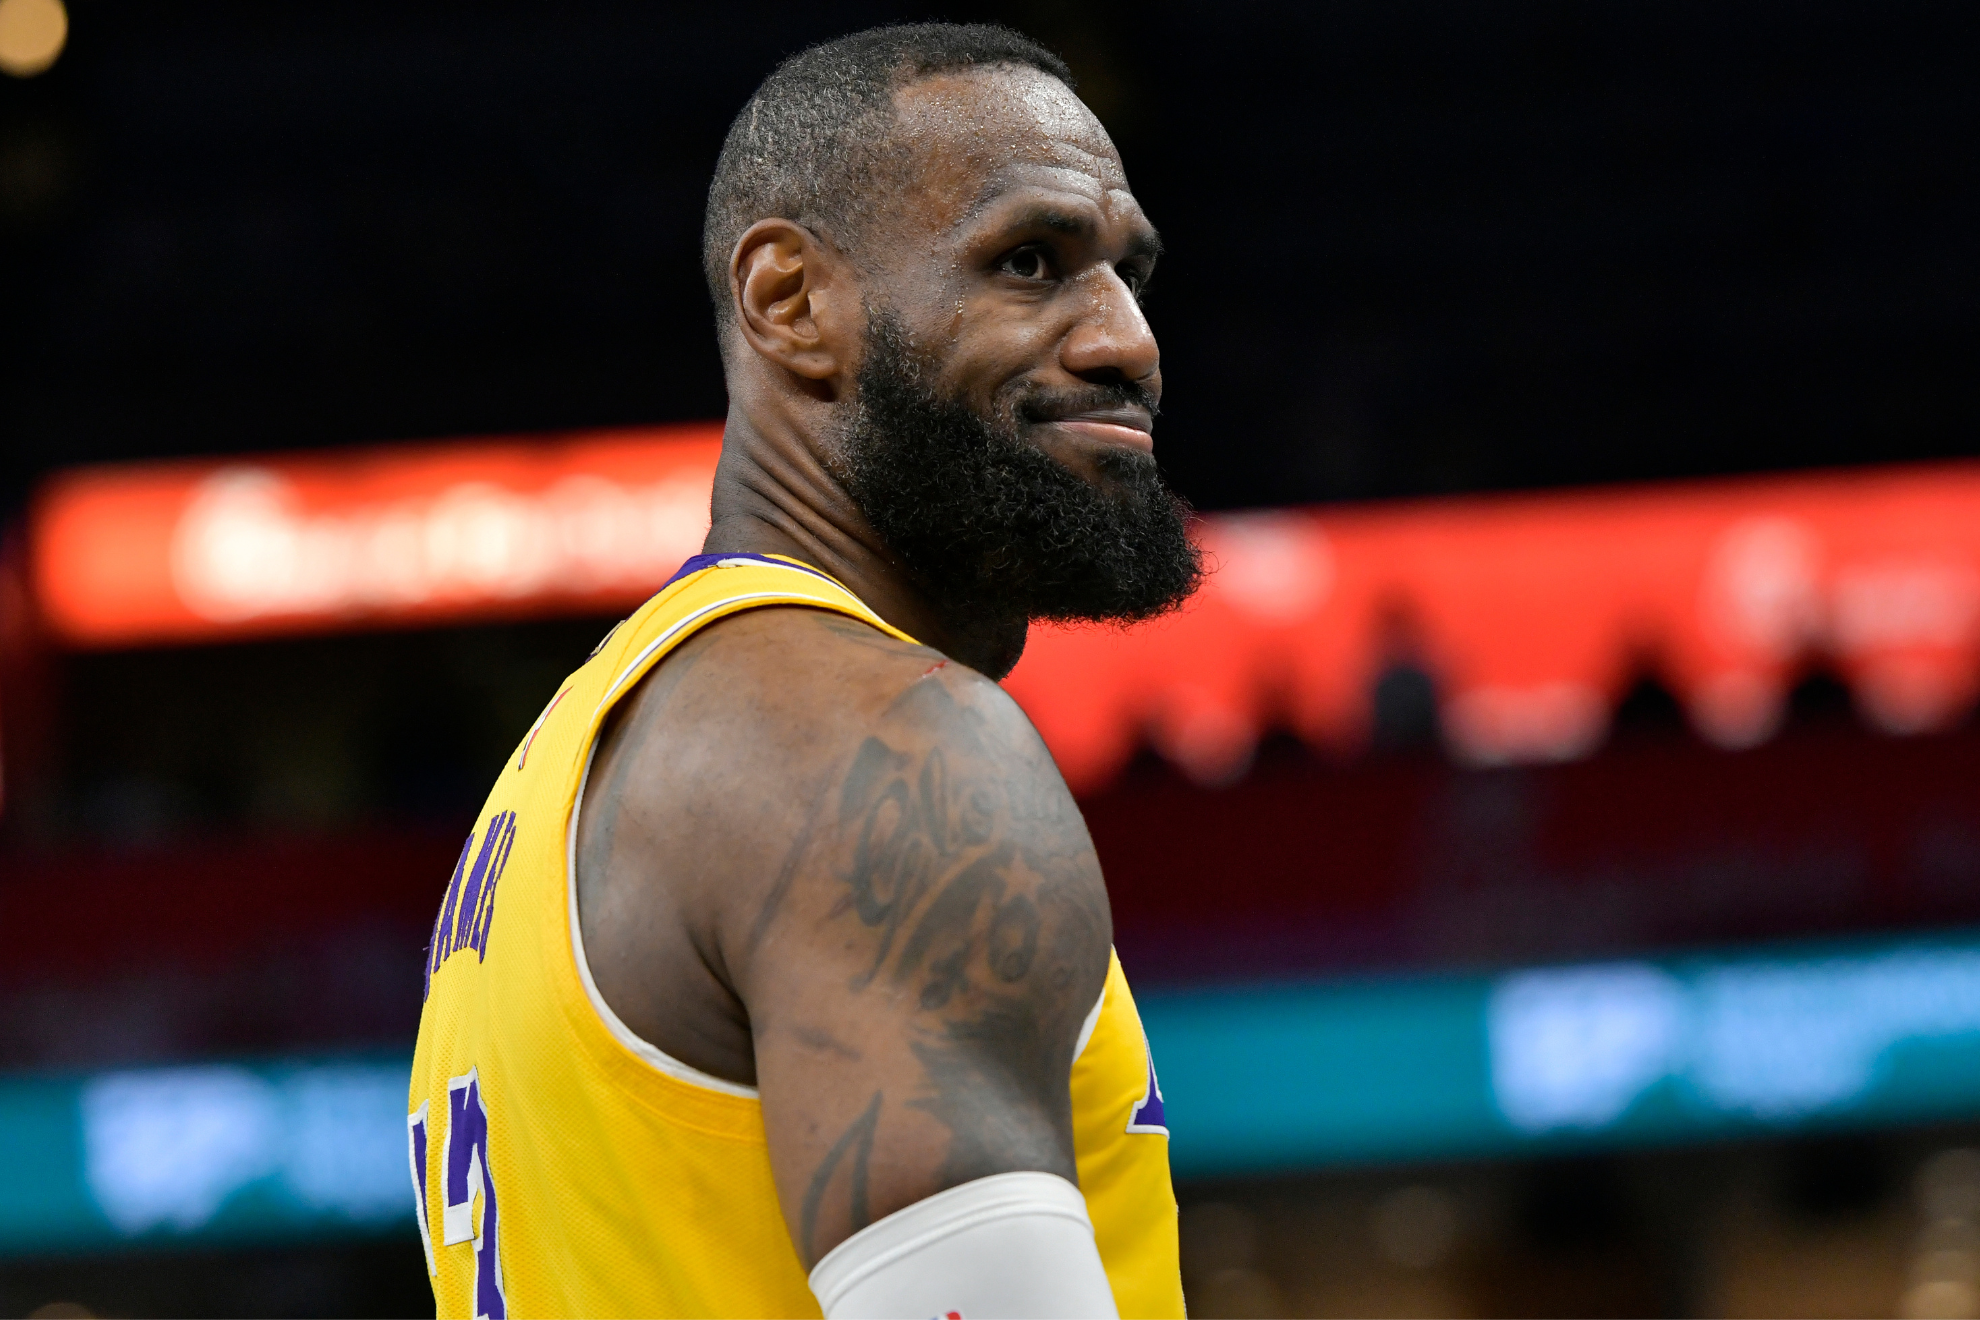 LeBron James is getting closer to Michael Jordan to take the title of GOAT, according to NBA players